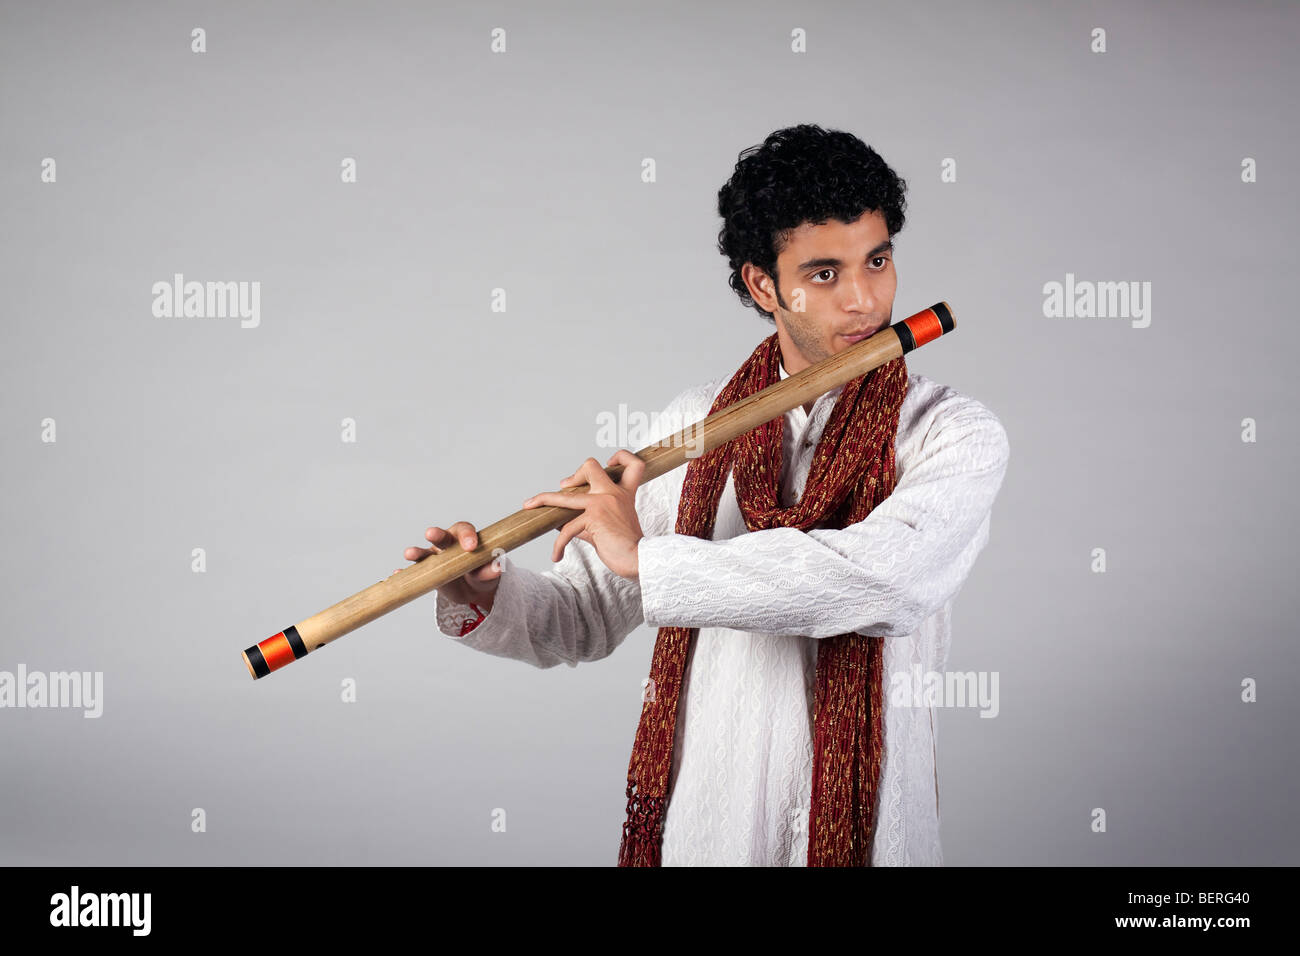 Man playing the flute Stock Photo